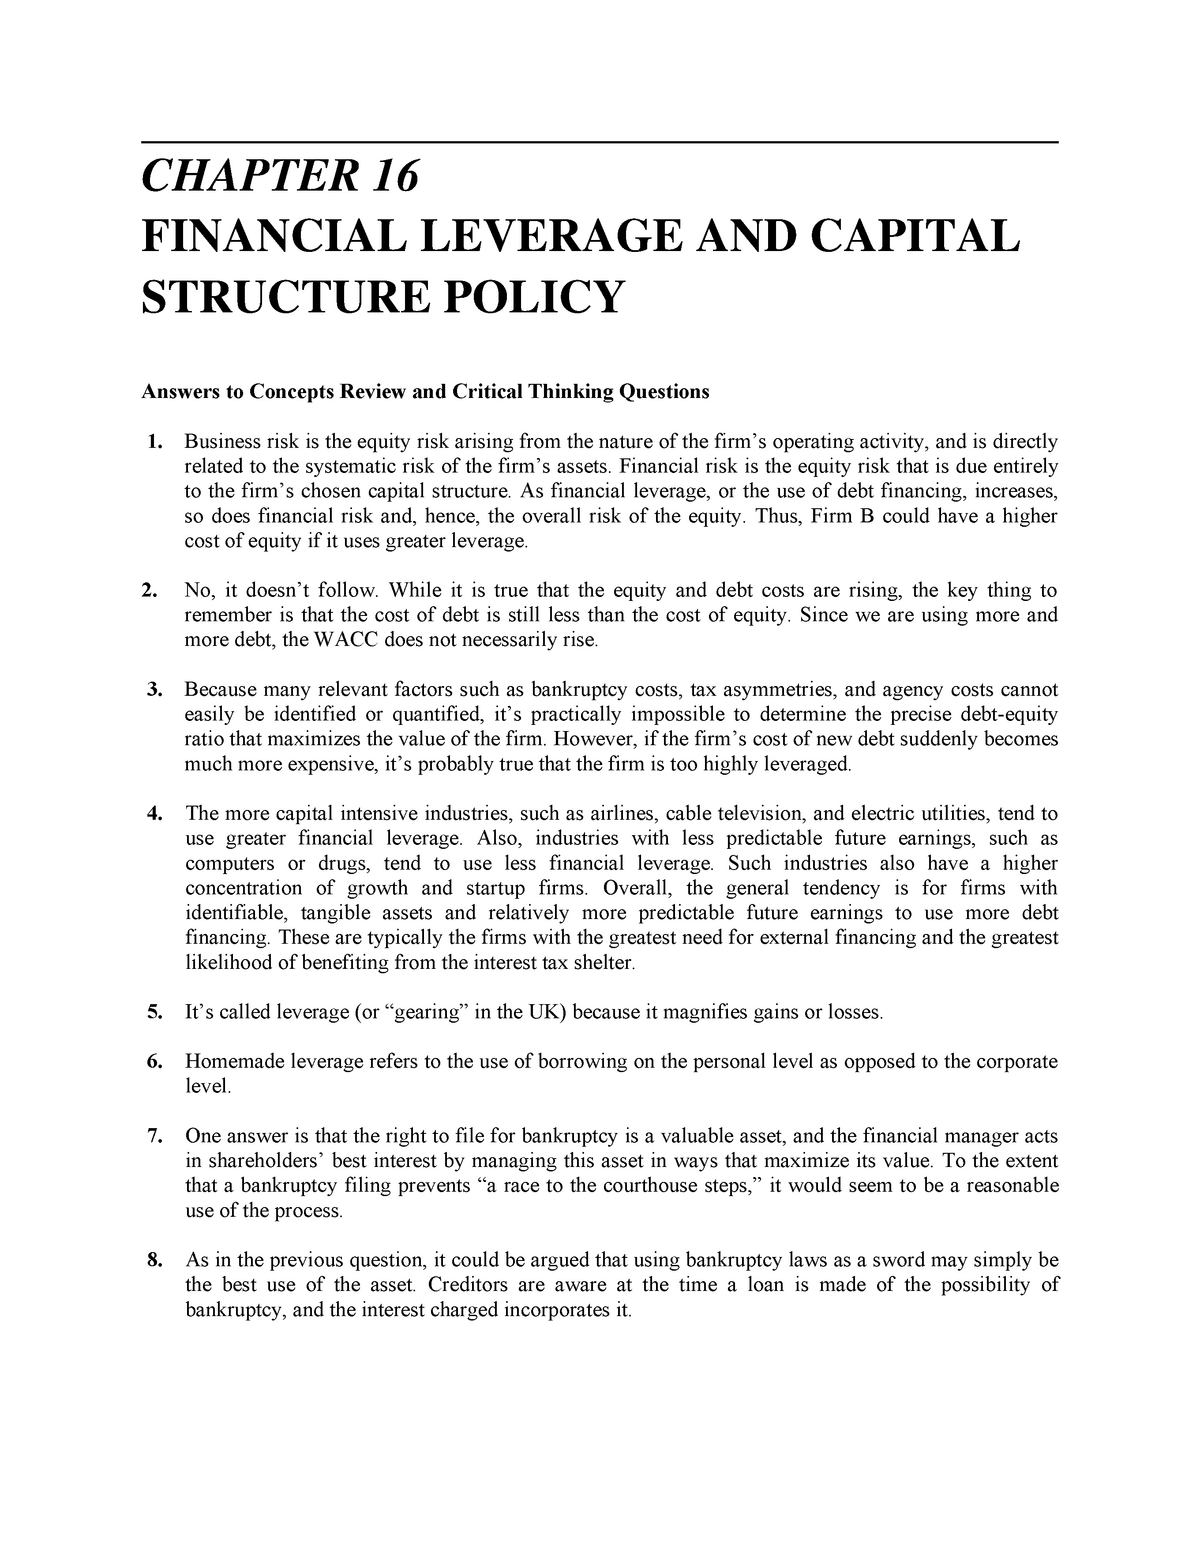 financial leverage refers to which of the following